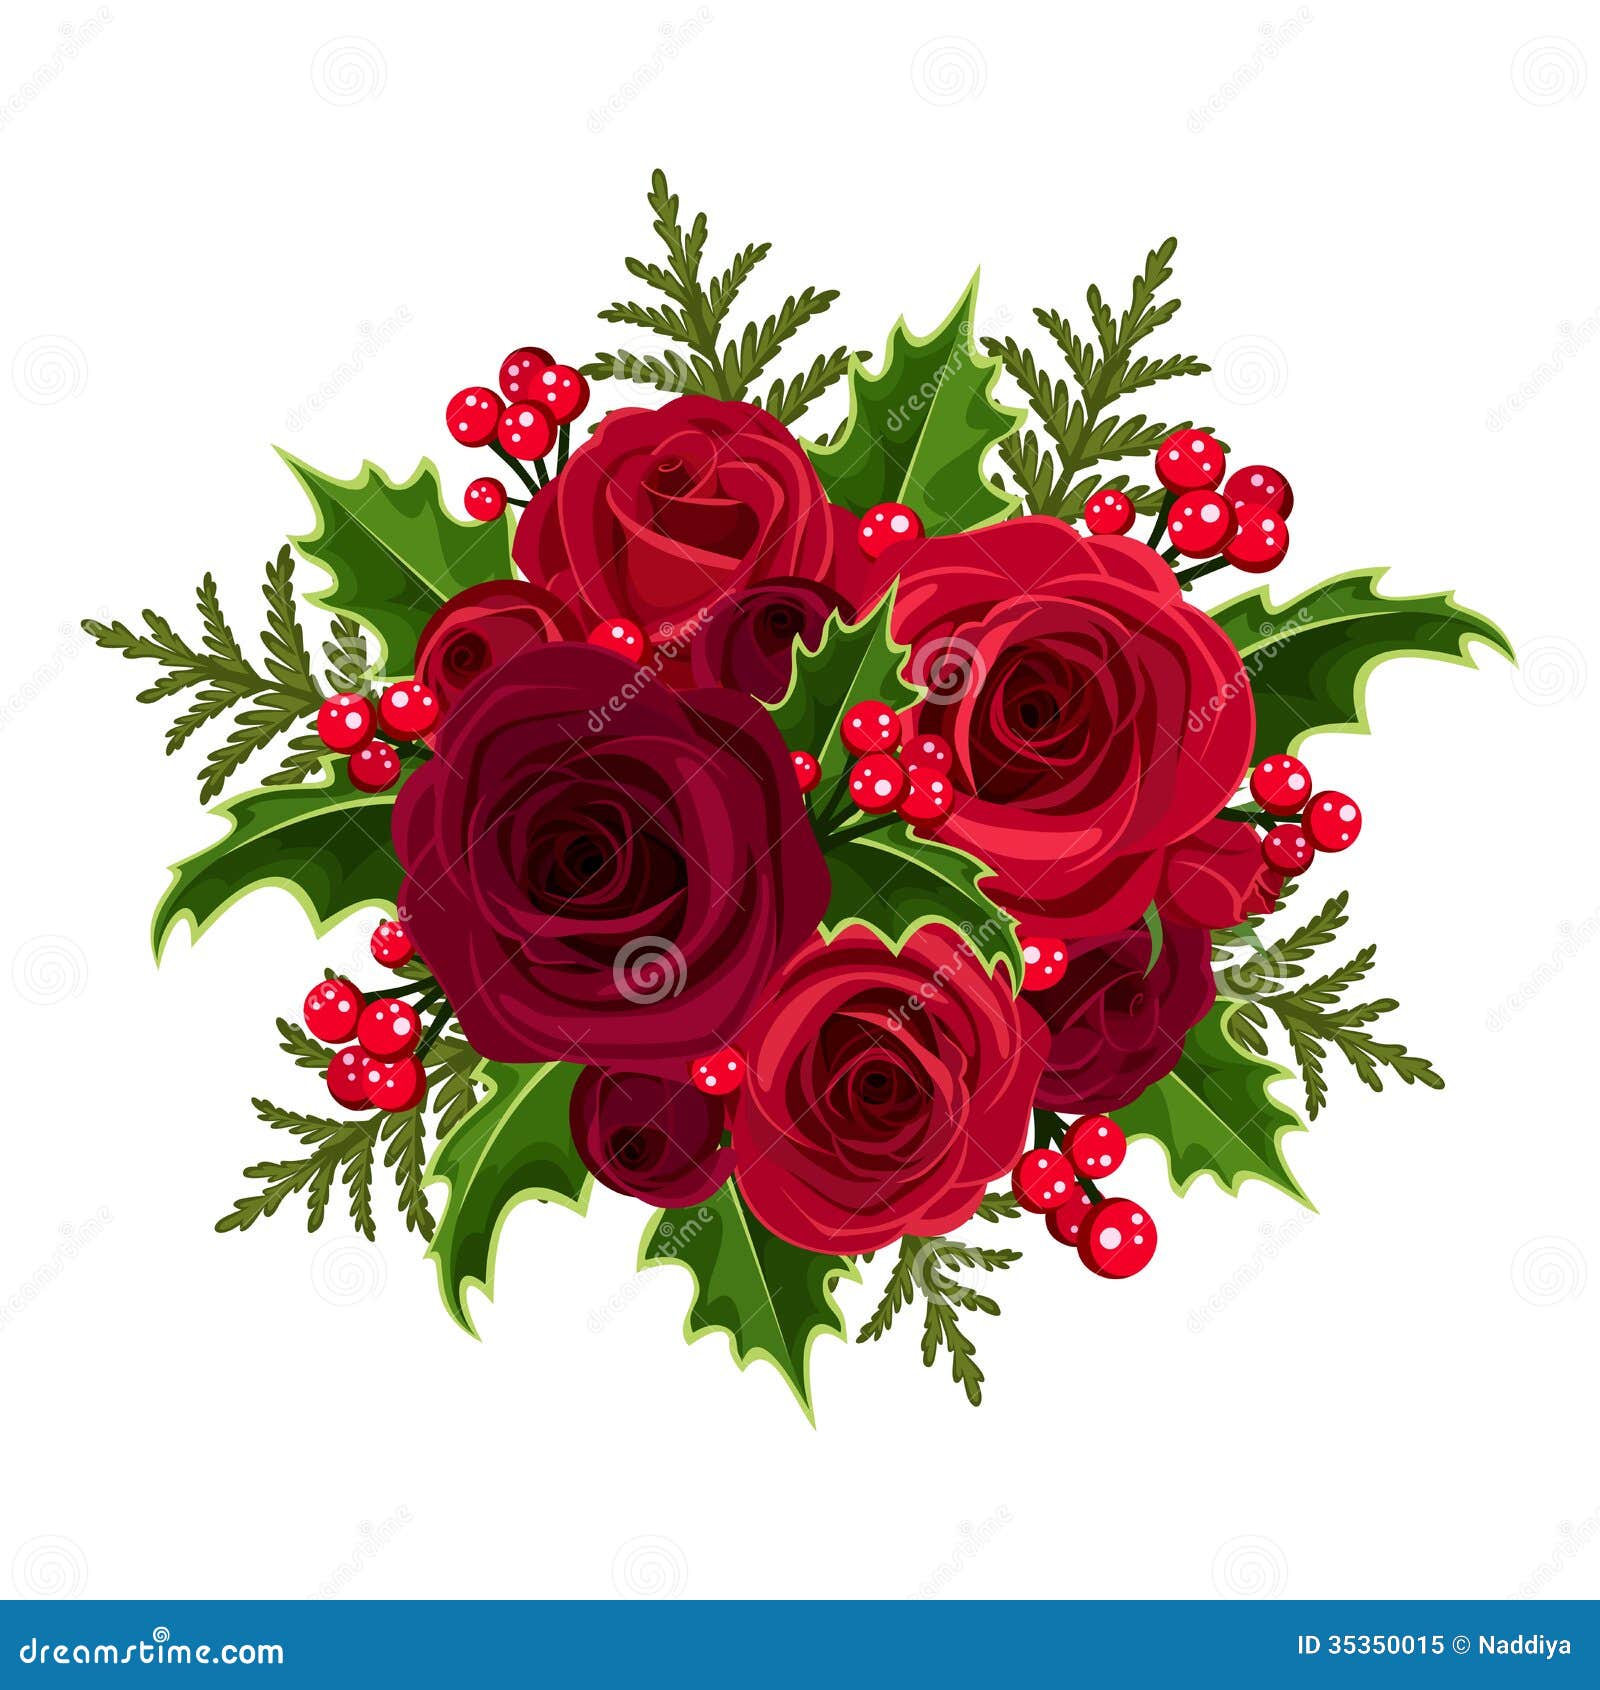 christmas rose clipart - photo #1